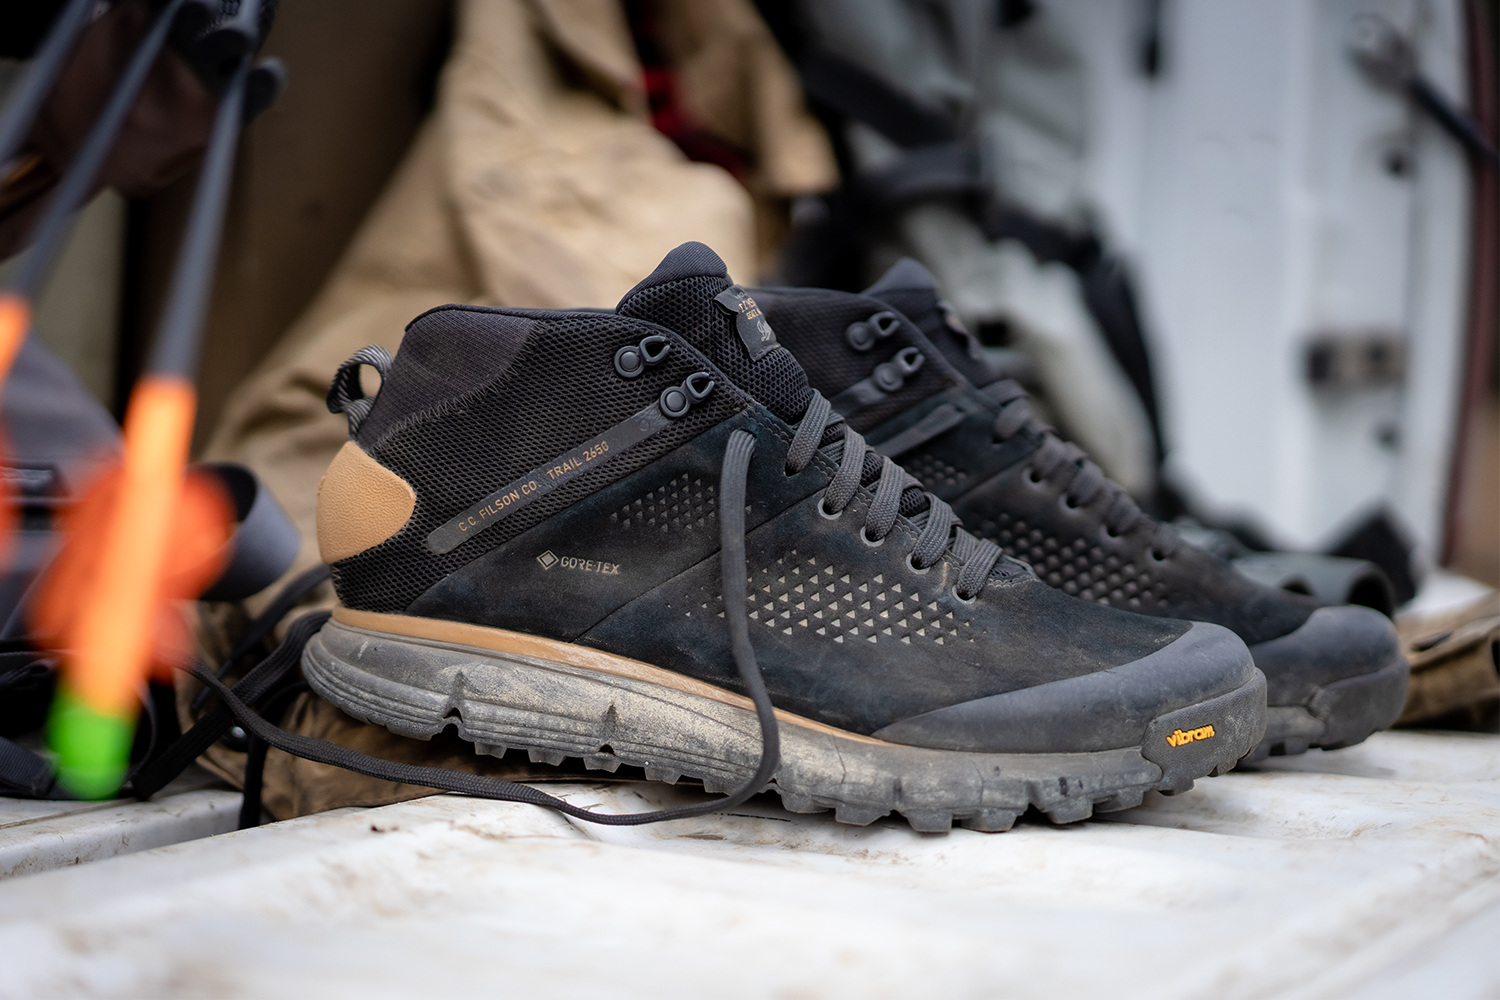 Filson and Danner Collab on Limited Trail 2650 Hiking Boots - InsideHook